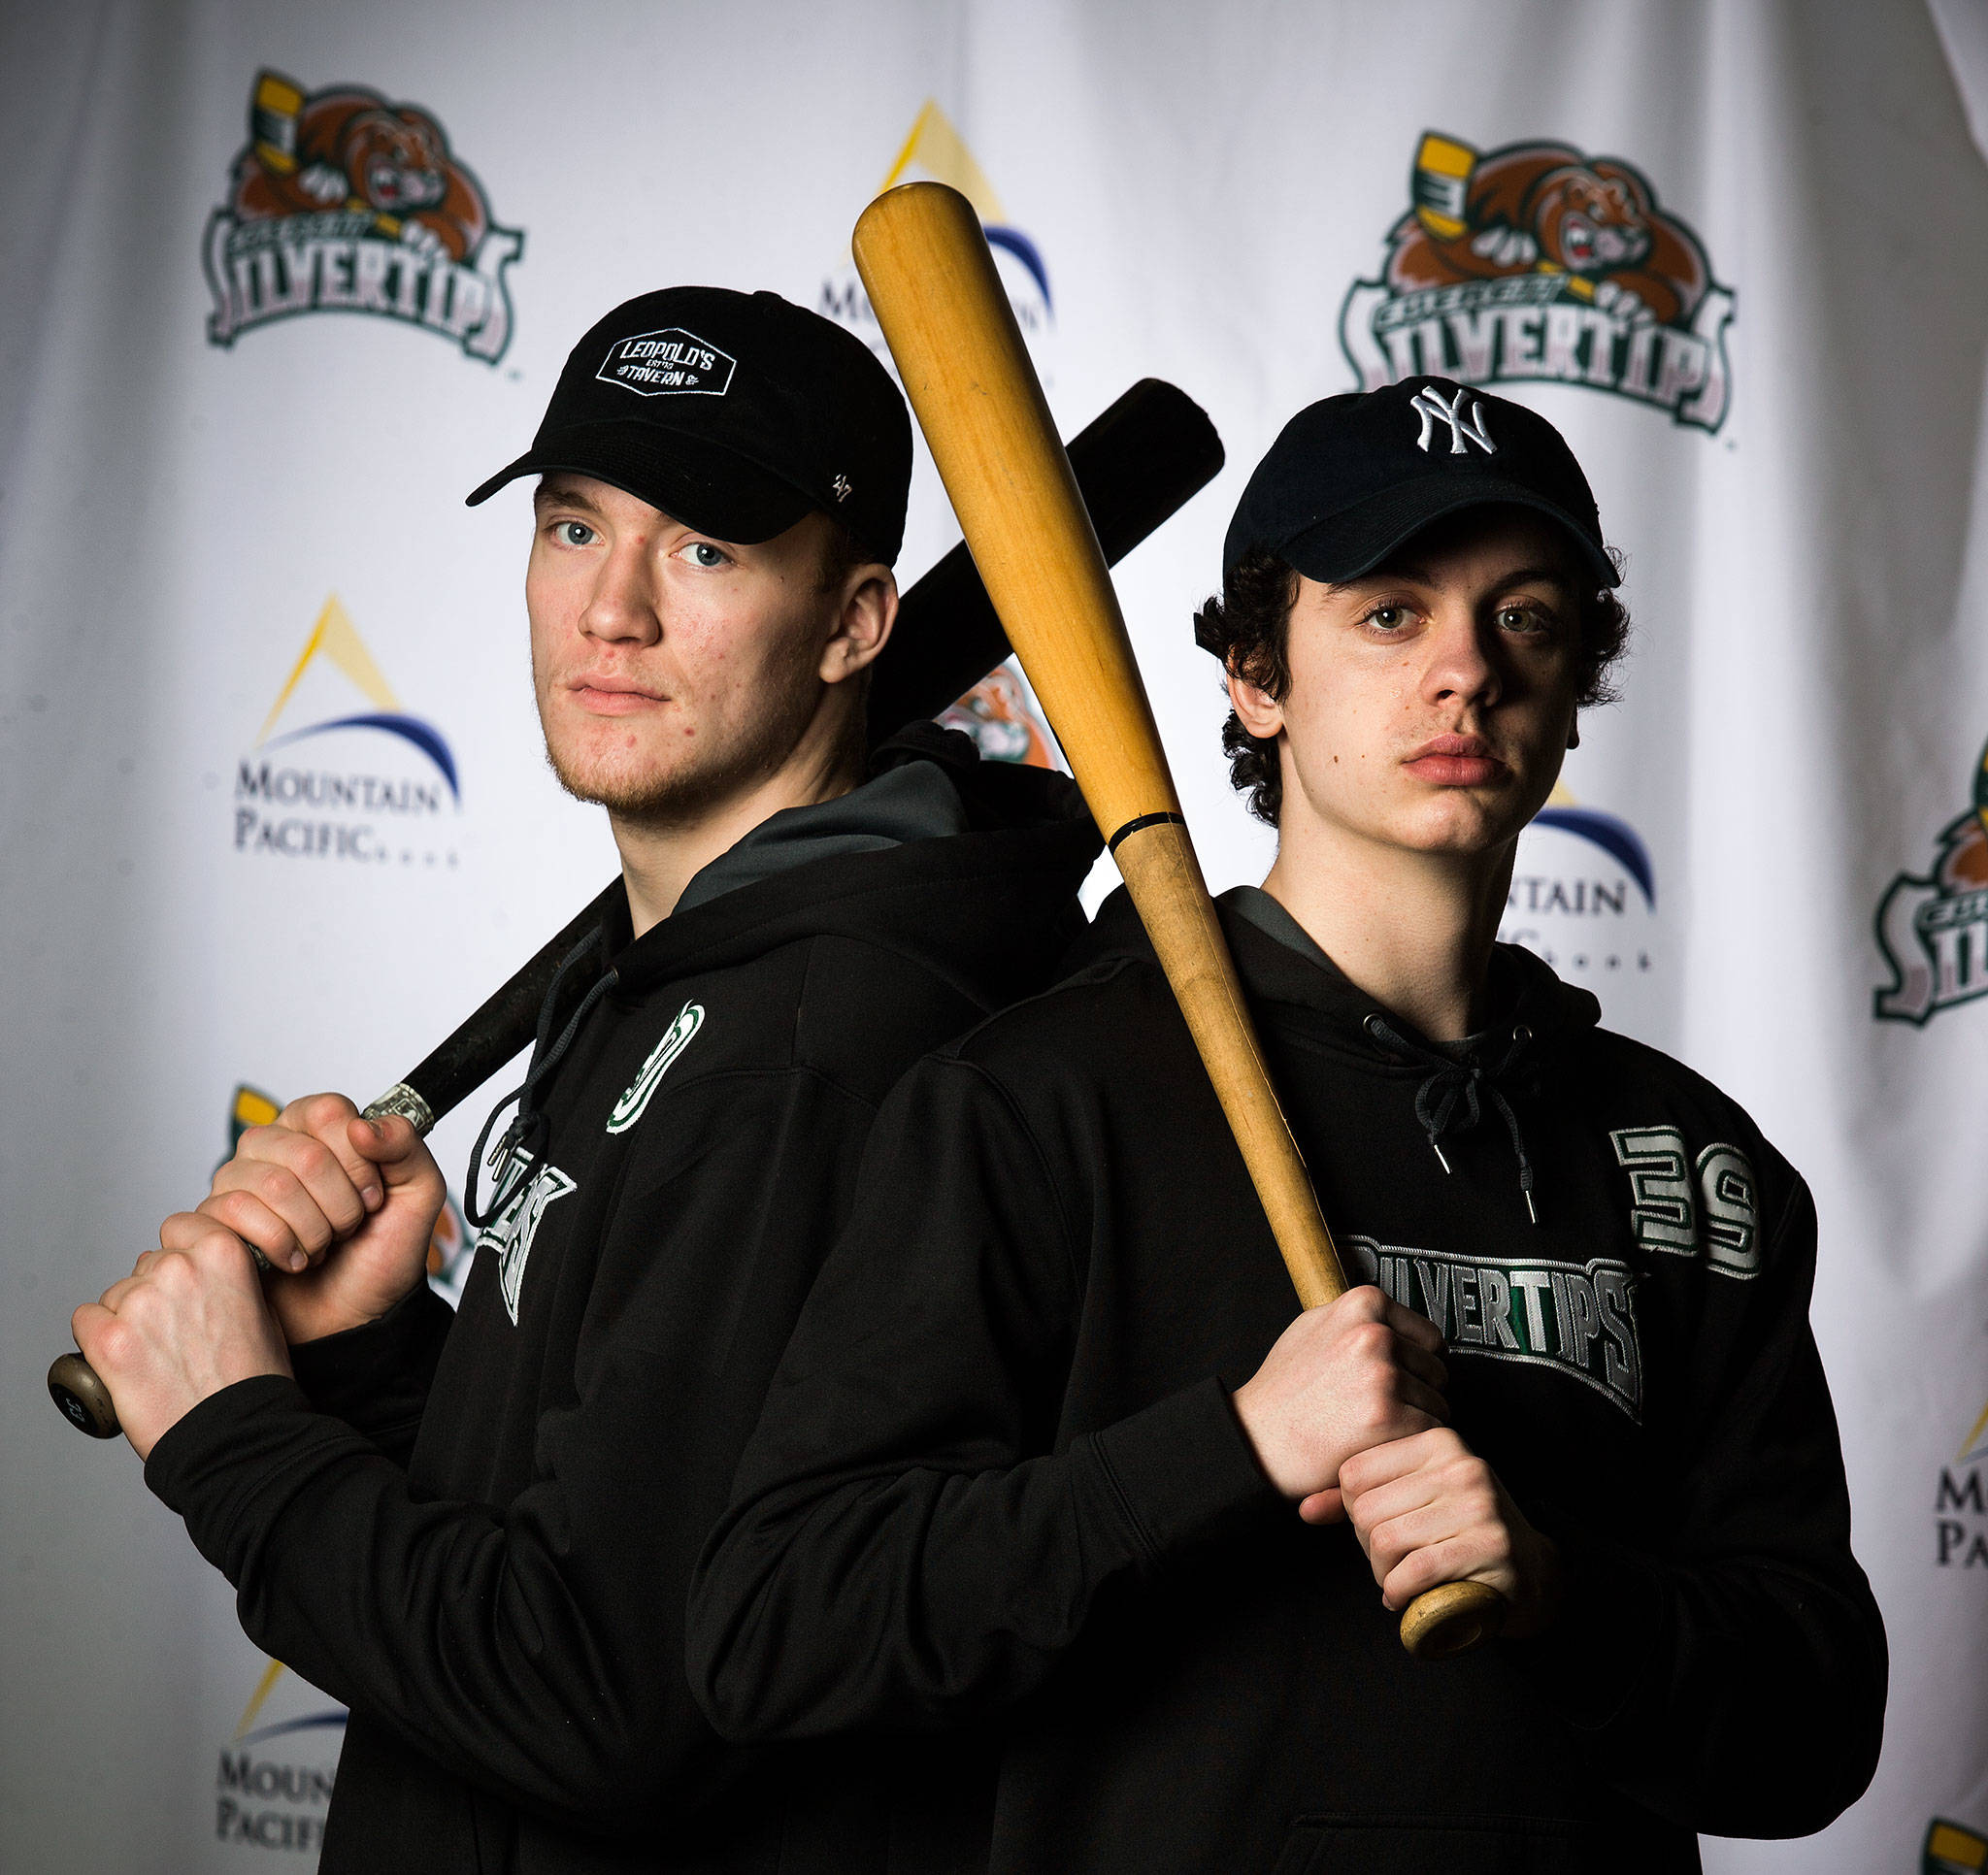 Silvertips players Robbie Holmes, left, and Gage Goncalves played a high level of baseball before committing to hockey full-time. Shot at Angels of the Winds Arena on Thursday, March 7, 2019 in Everett, Wash. (Andy Bronson / The Herald)